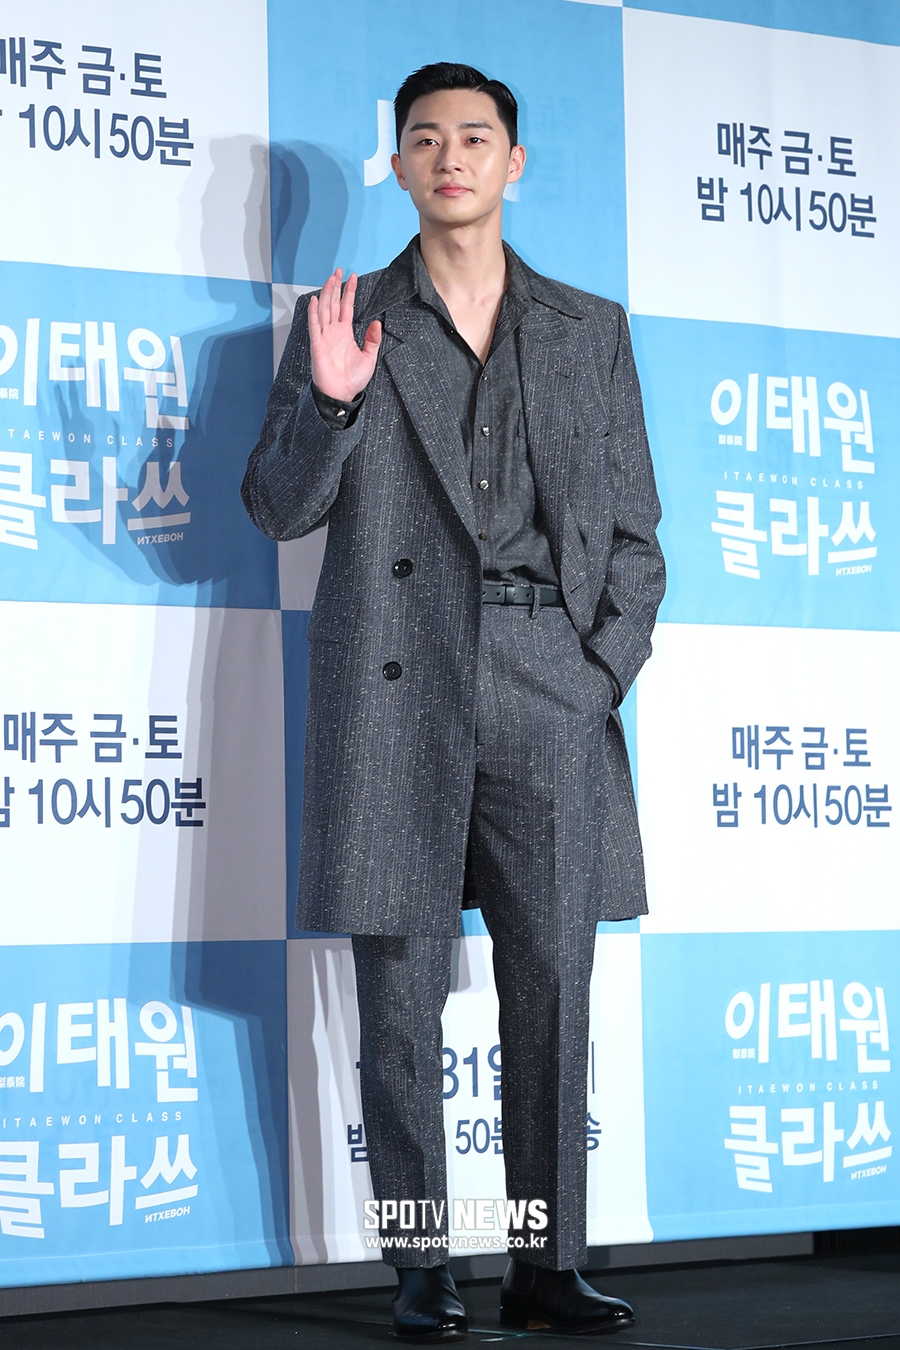 JTBCs new gilt drama Itaewon Clath was held at the Conrad Hotel in Yeouido, Seoul Youngdeungpo District on the afternoon of the 30th.Actor Park Seo-joon poses.